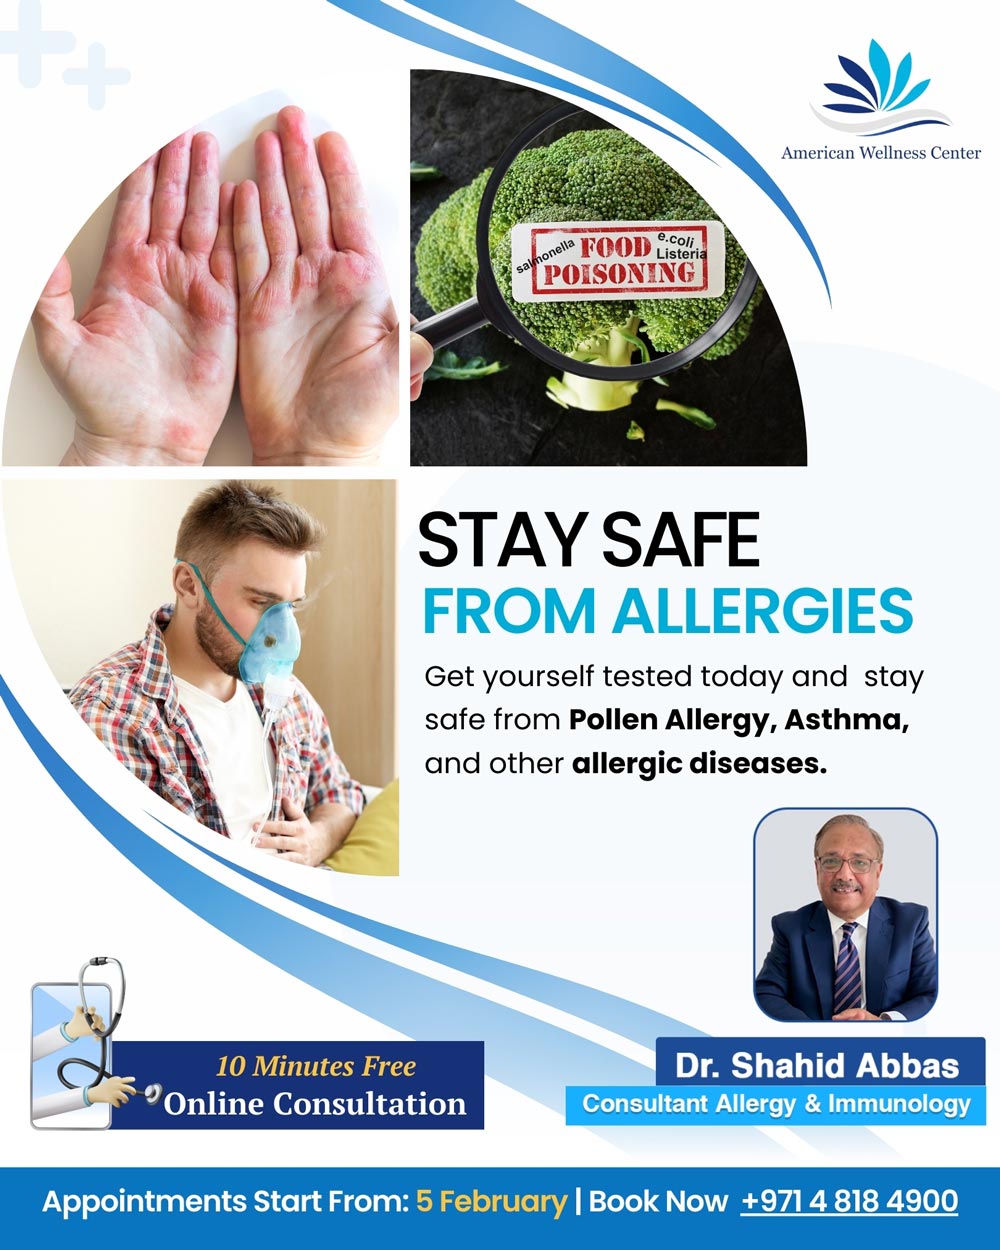 Stay Safe from allergies